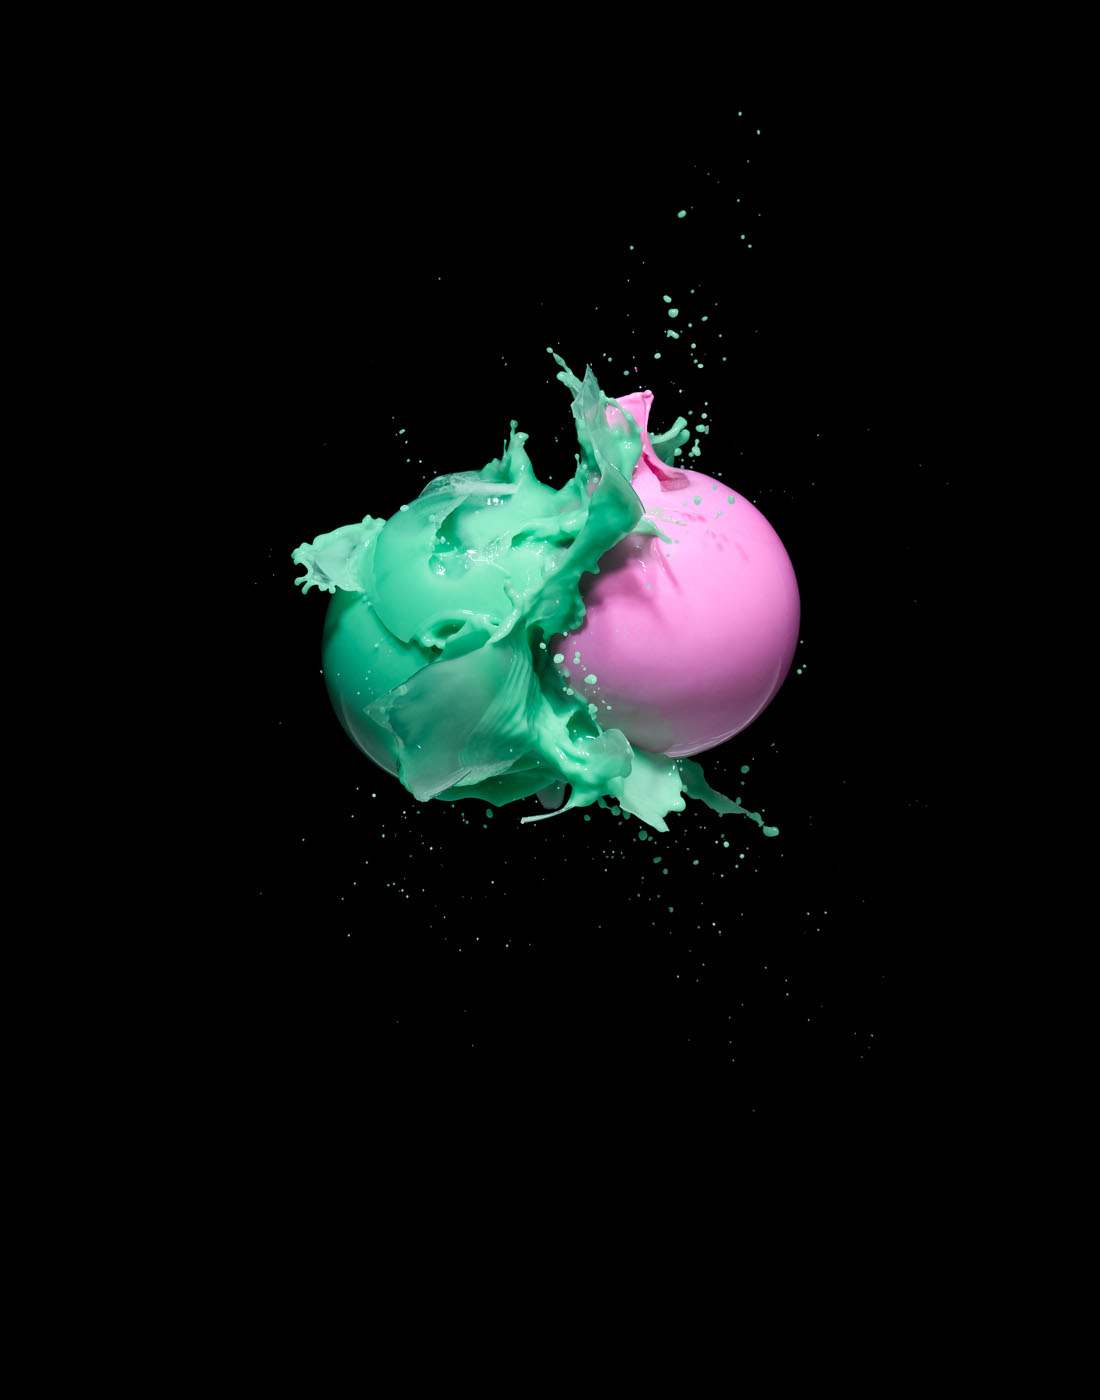 Green and pink paint explosion on black background by Alexander Kent London based still life and product photographer.